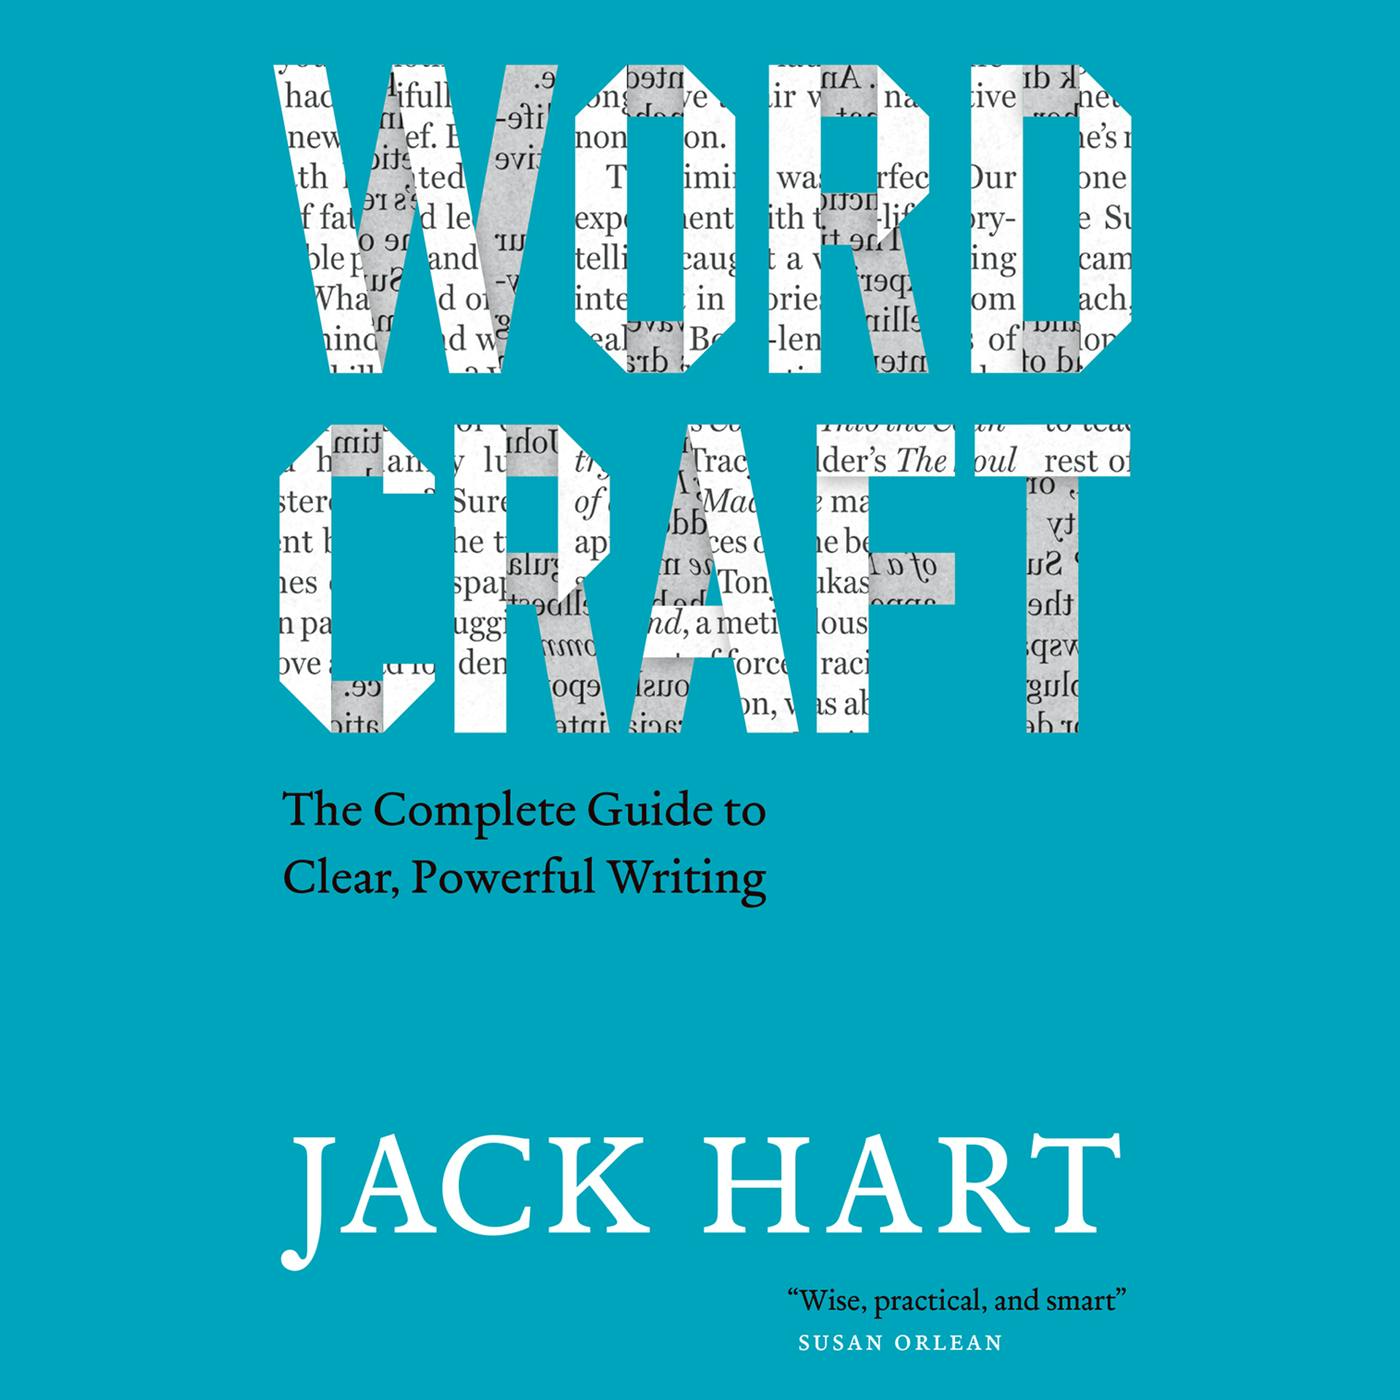 Wordcraft - The Complete Guide to Clear, Powerful Writing (Unabridged) - Jack Hart